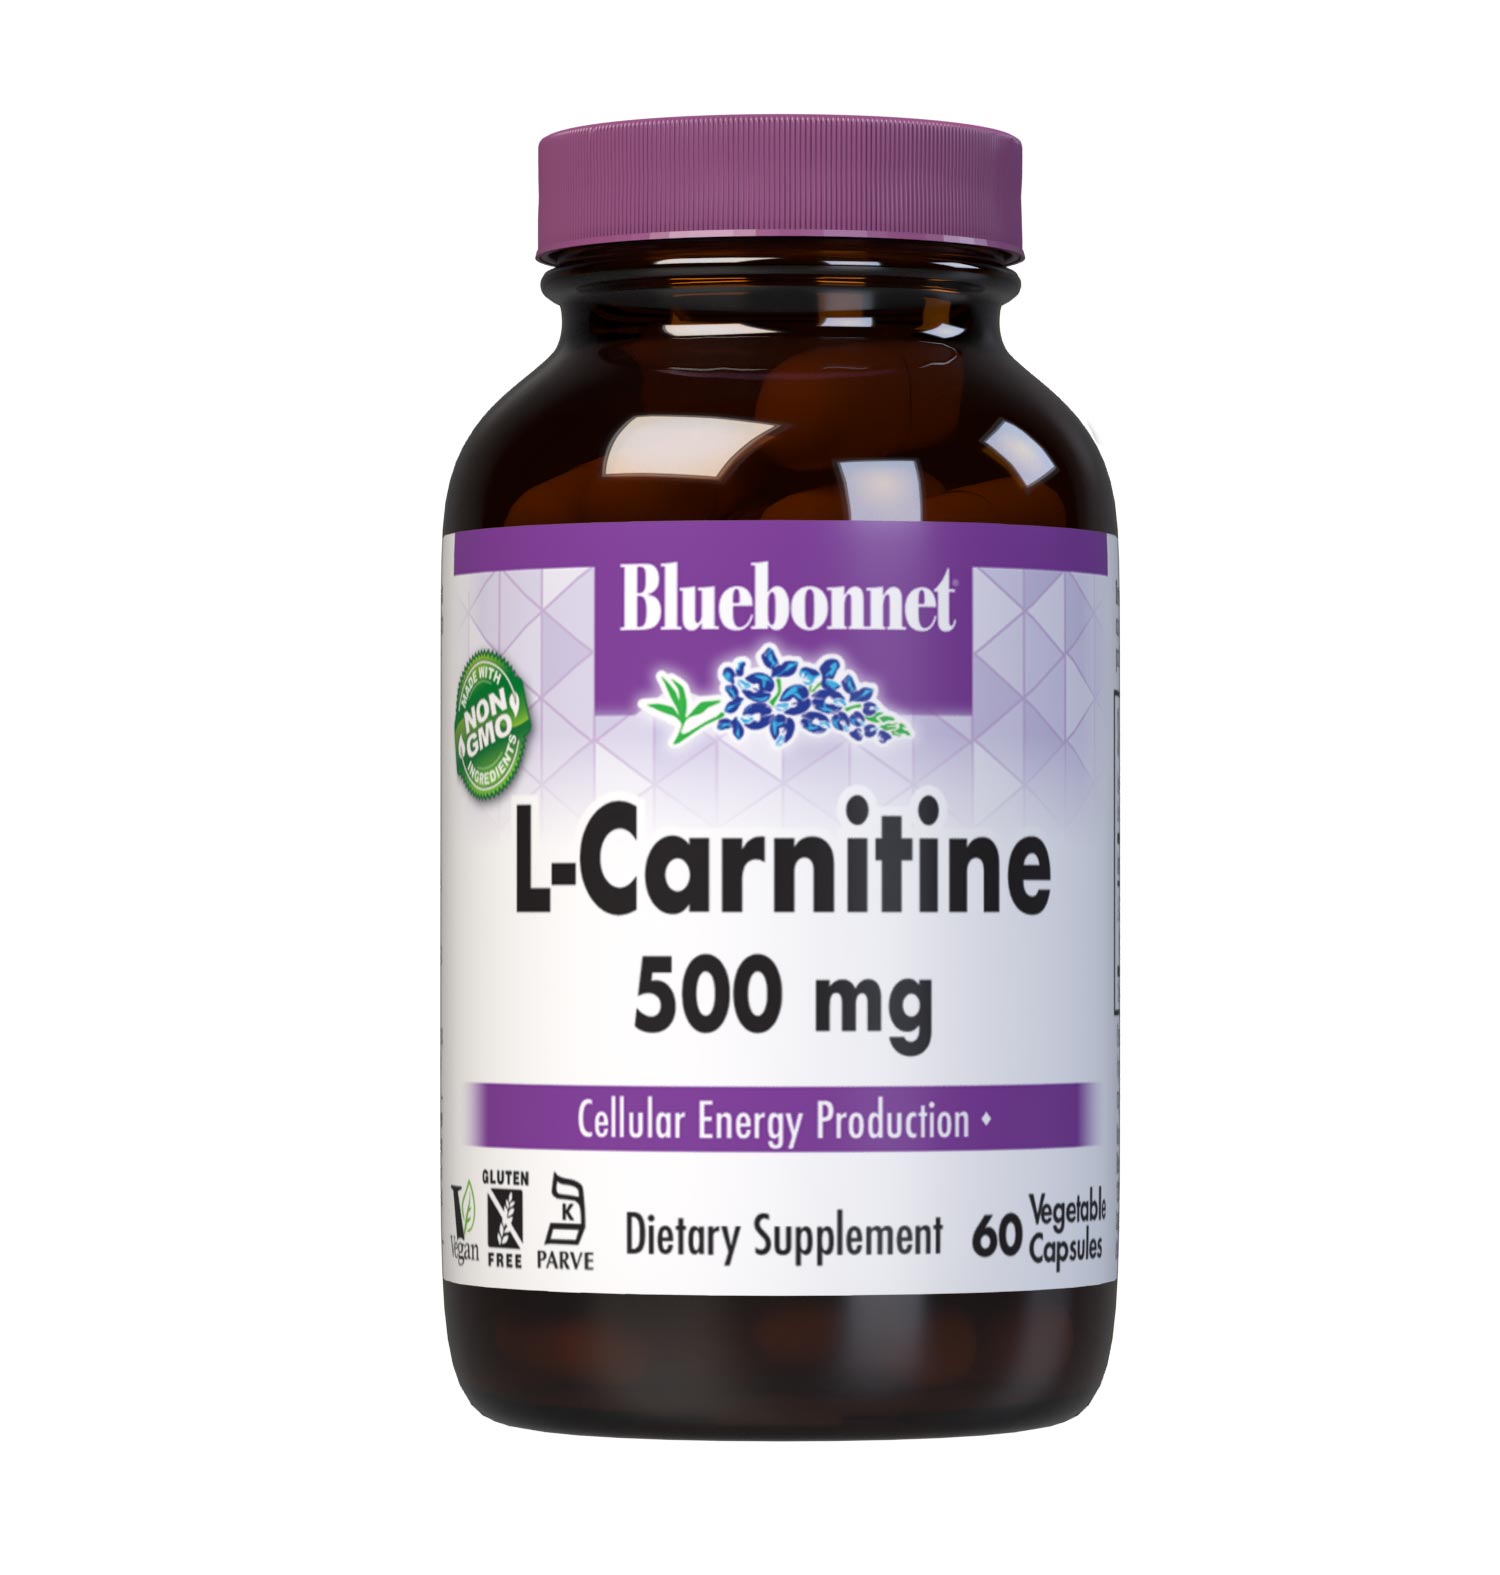 Bluebonnet’s L-Carnitine 500 mg 60 Vegetable Capsules are formulated with the free-form amino acid L-carnitine tartrate in its crystalline form which may support cellular energy. #size_60 count